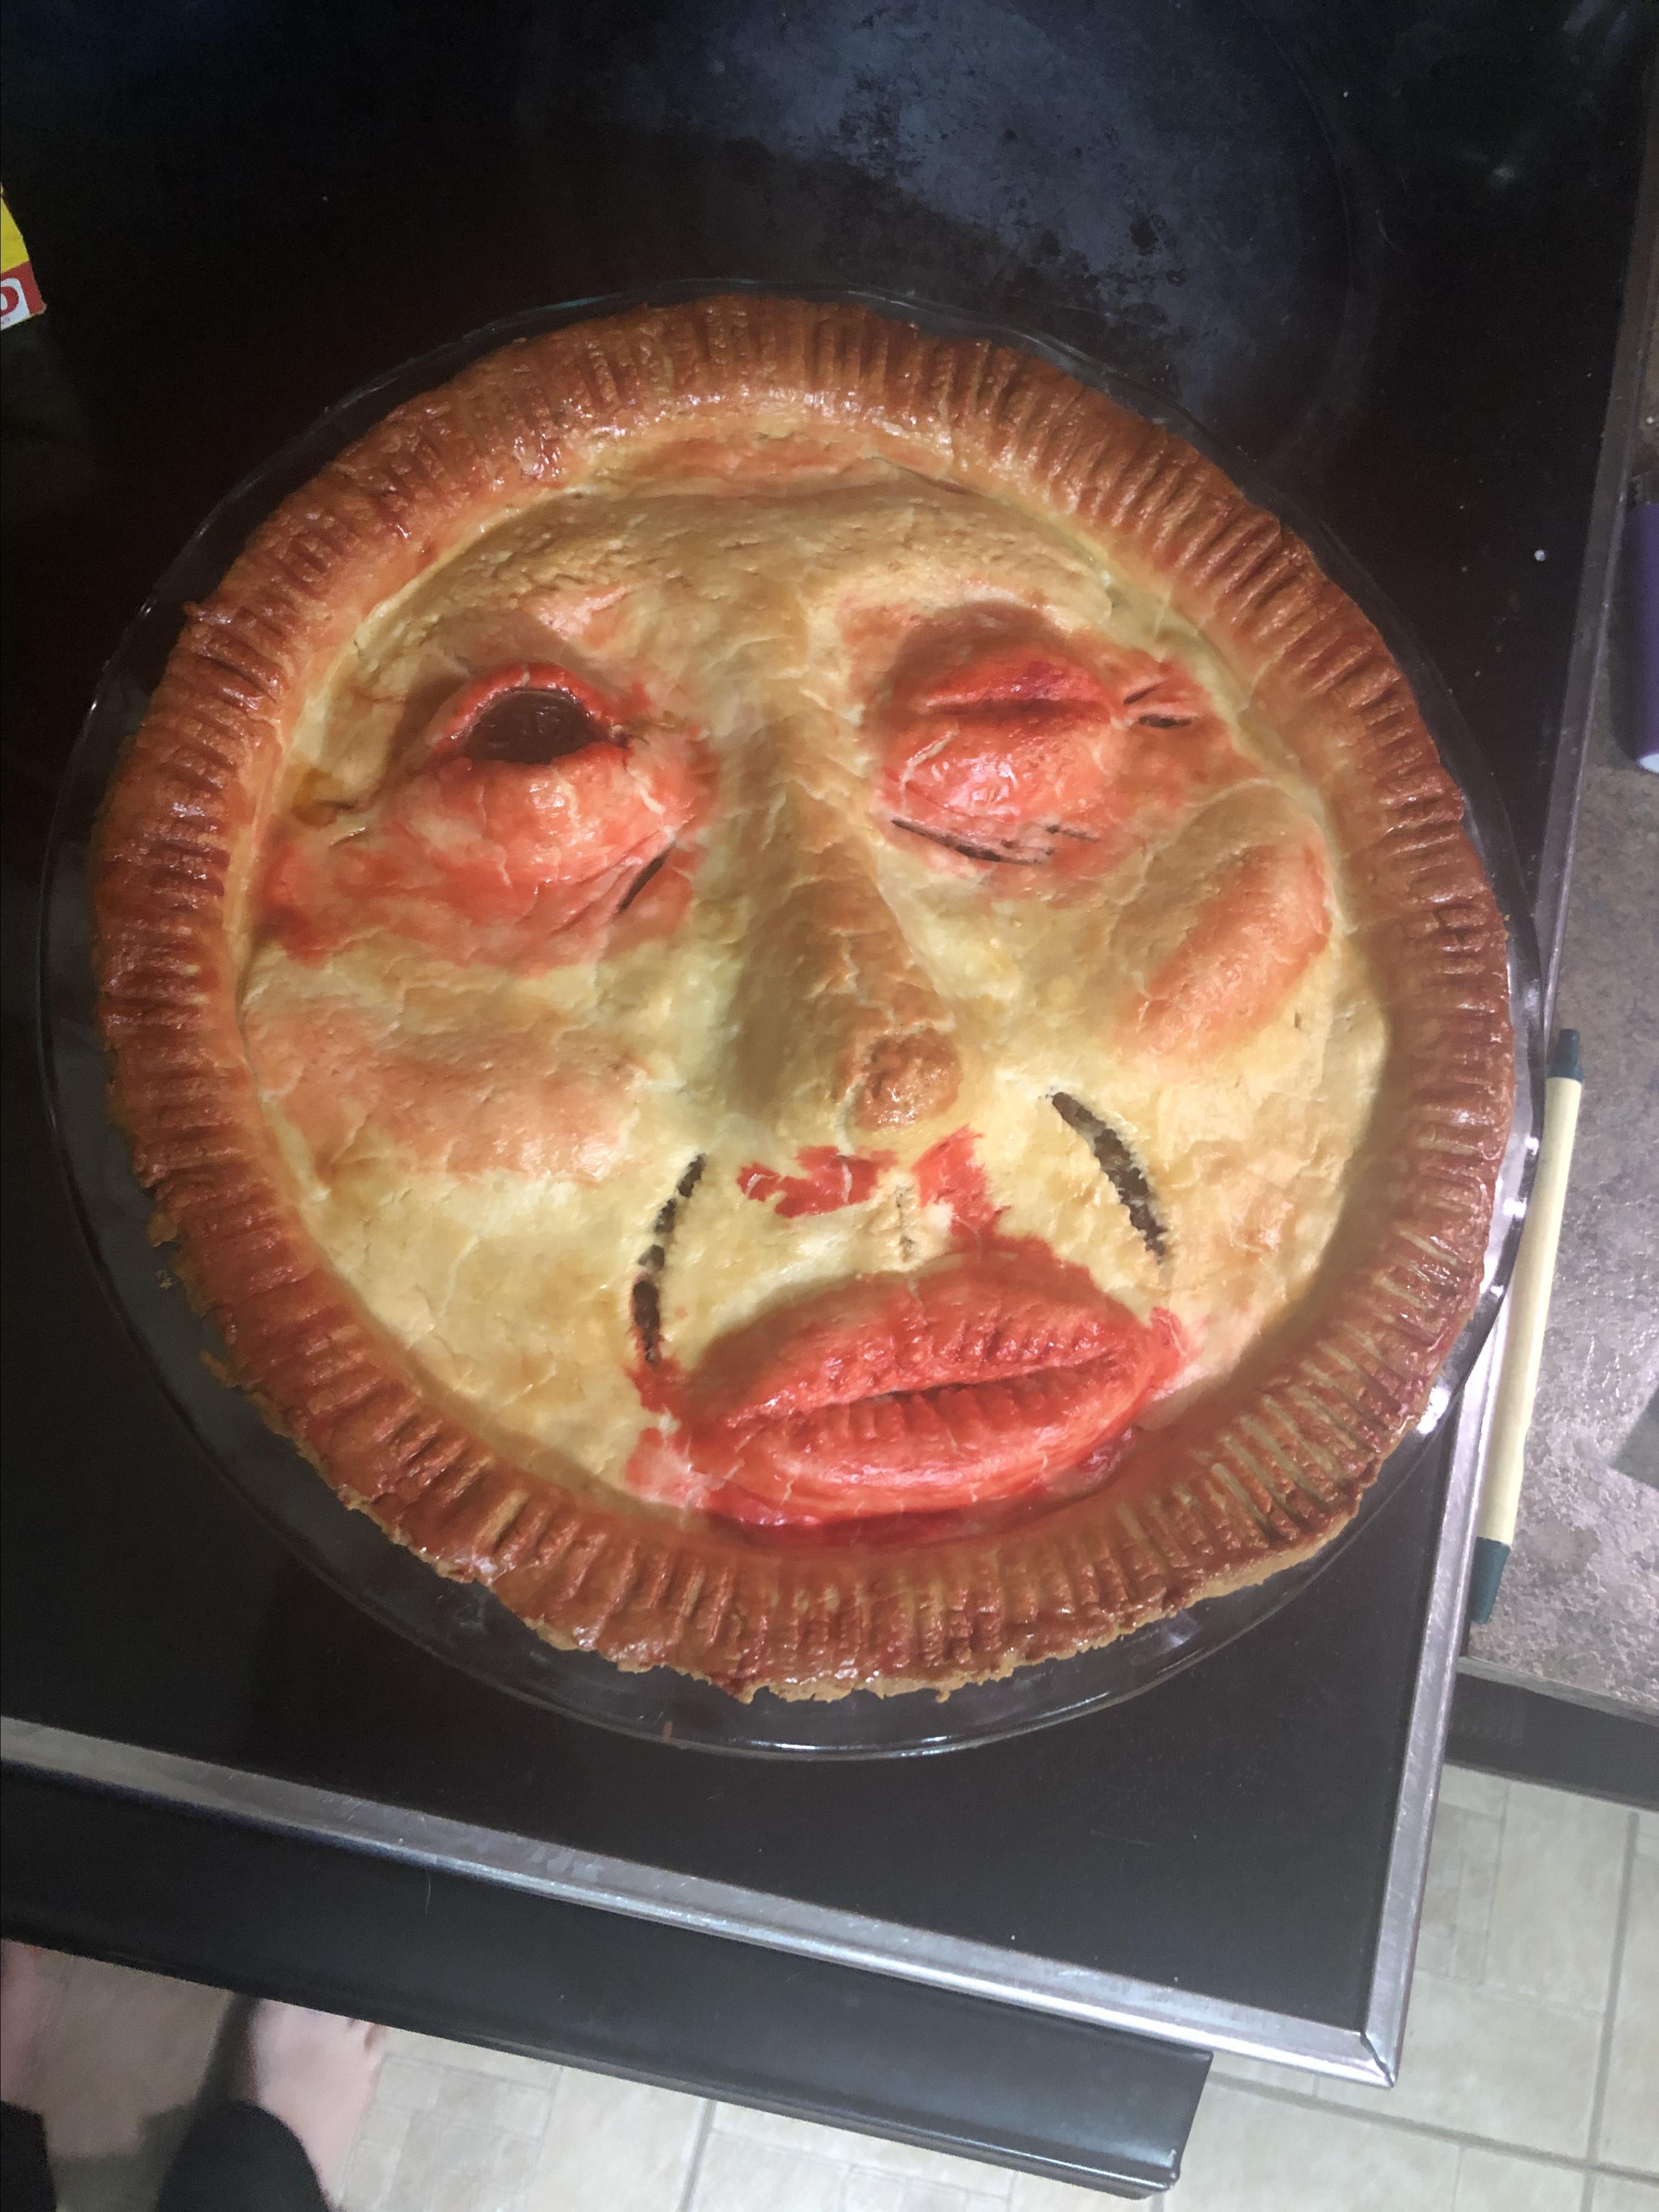 Peas and pies face